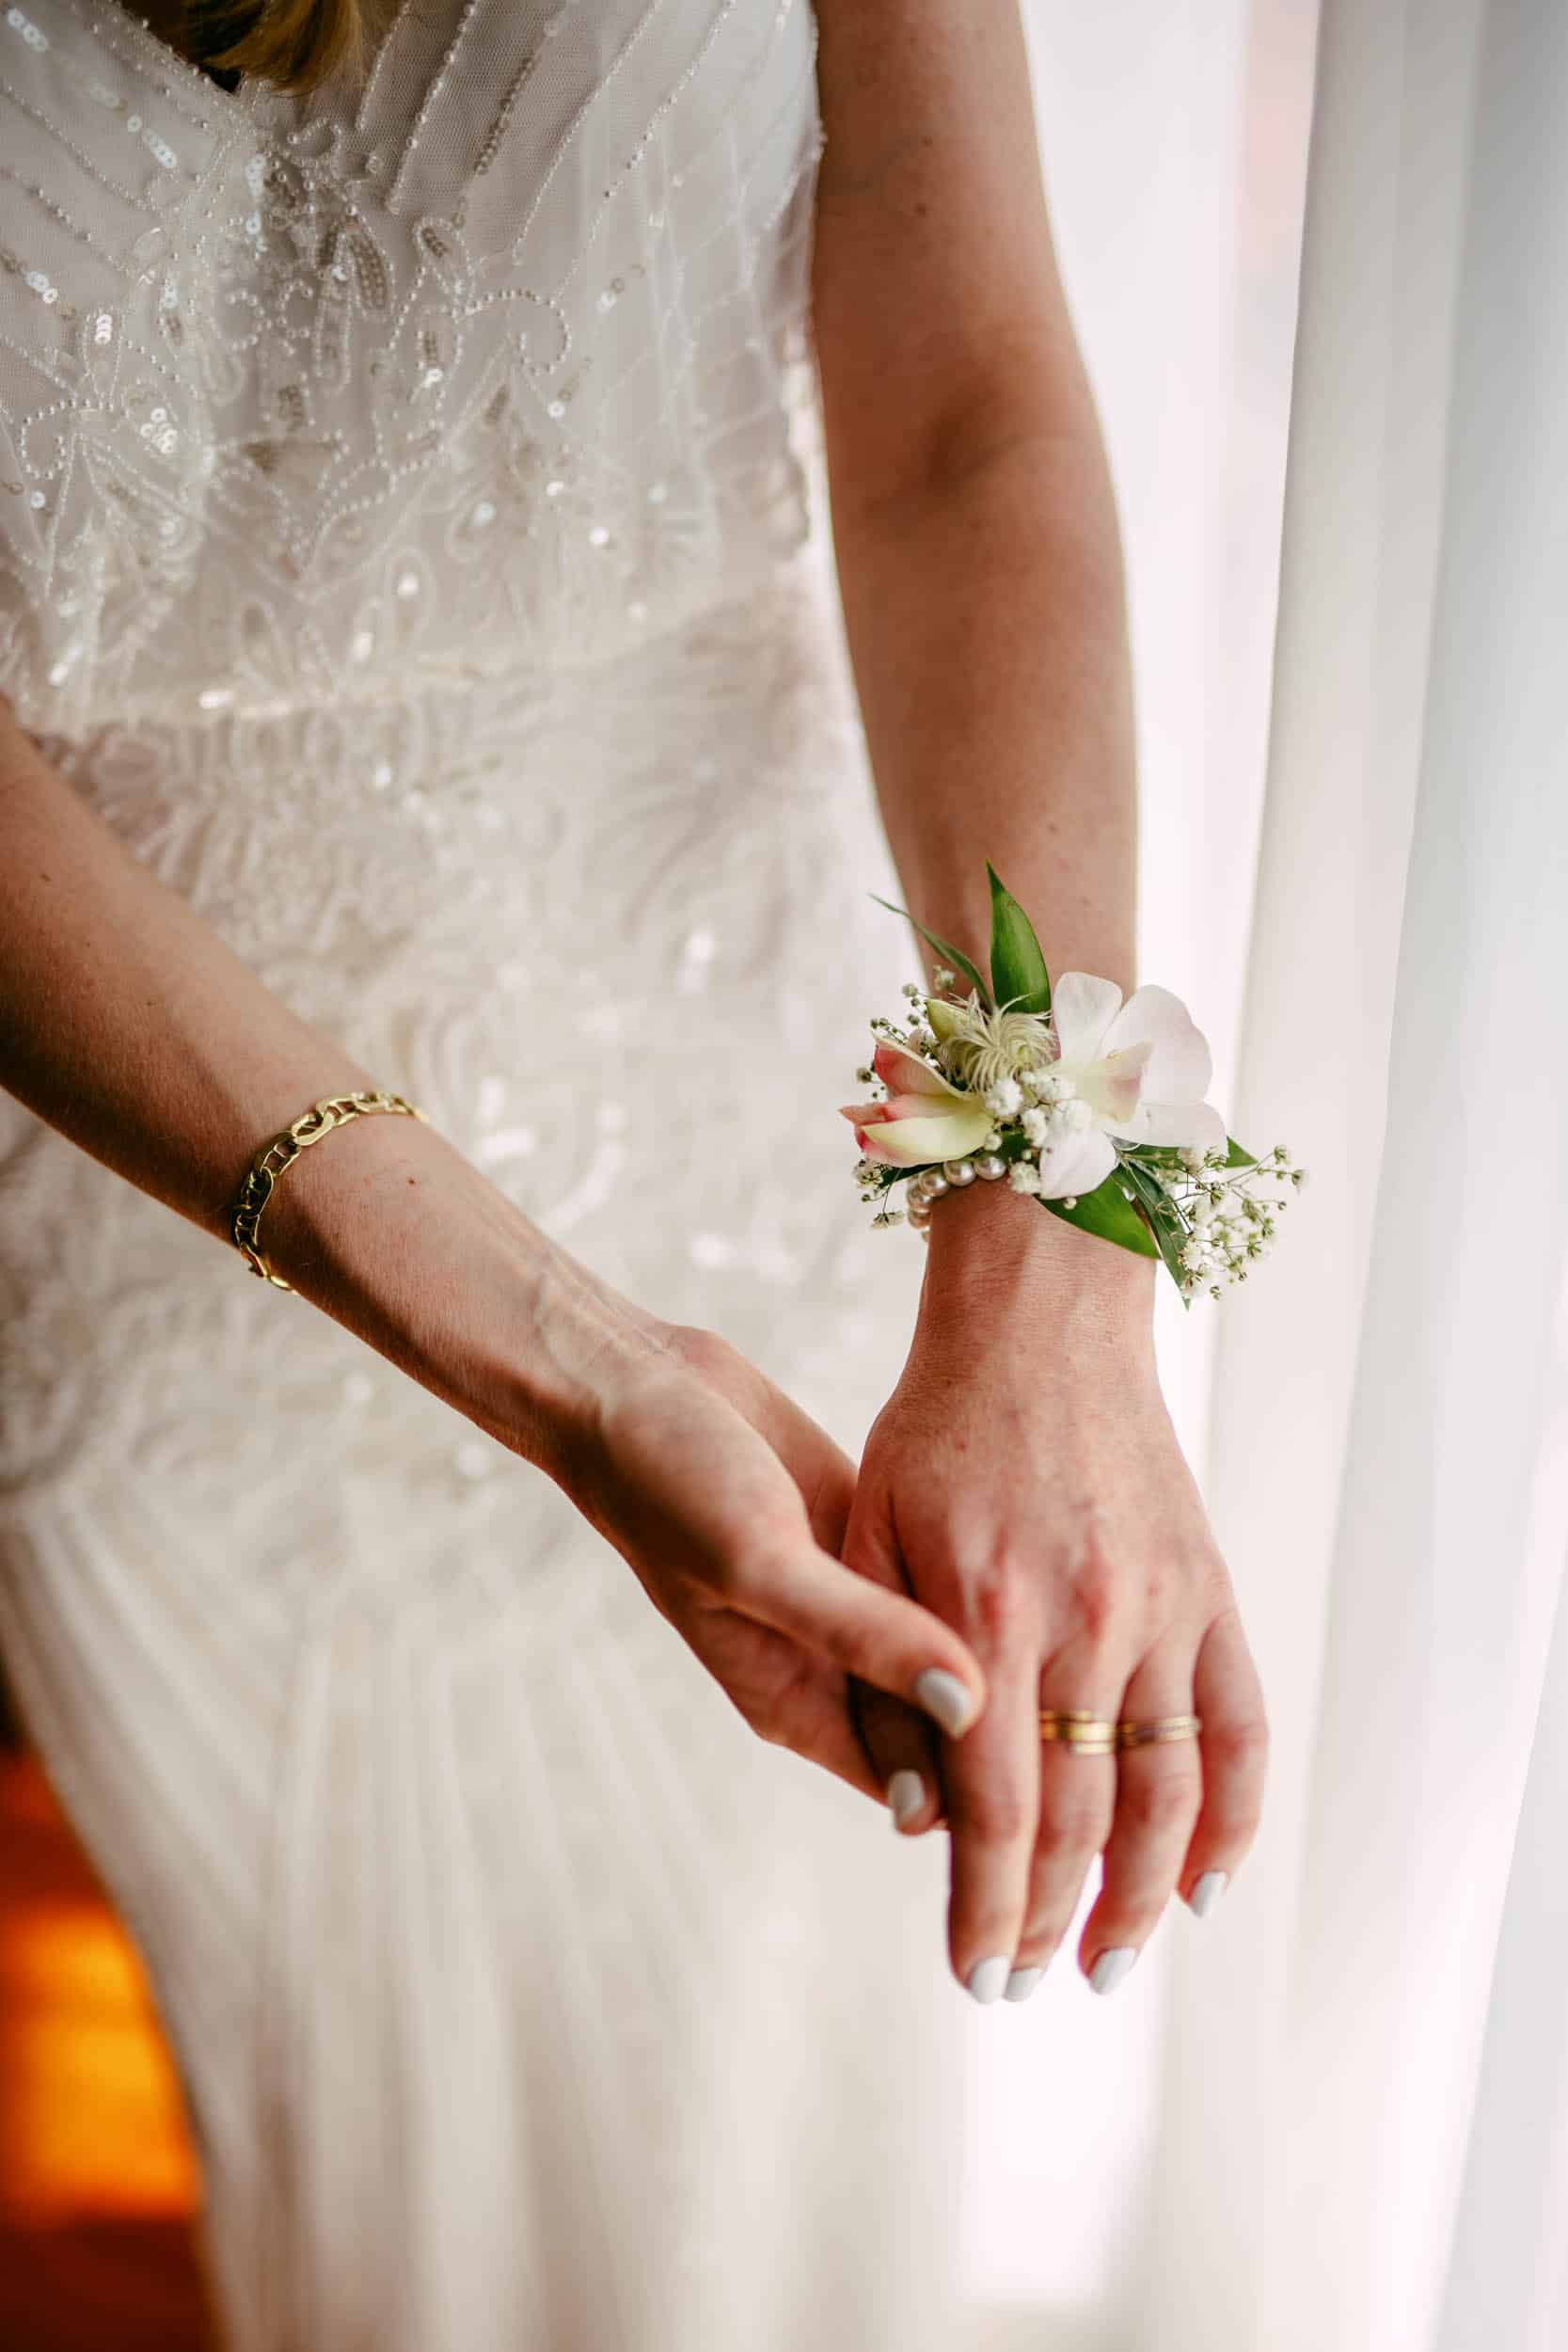 Corsage on the bride's wrist.